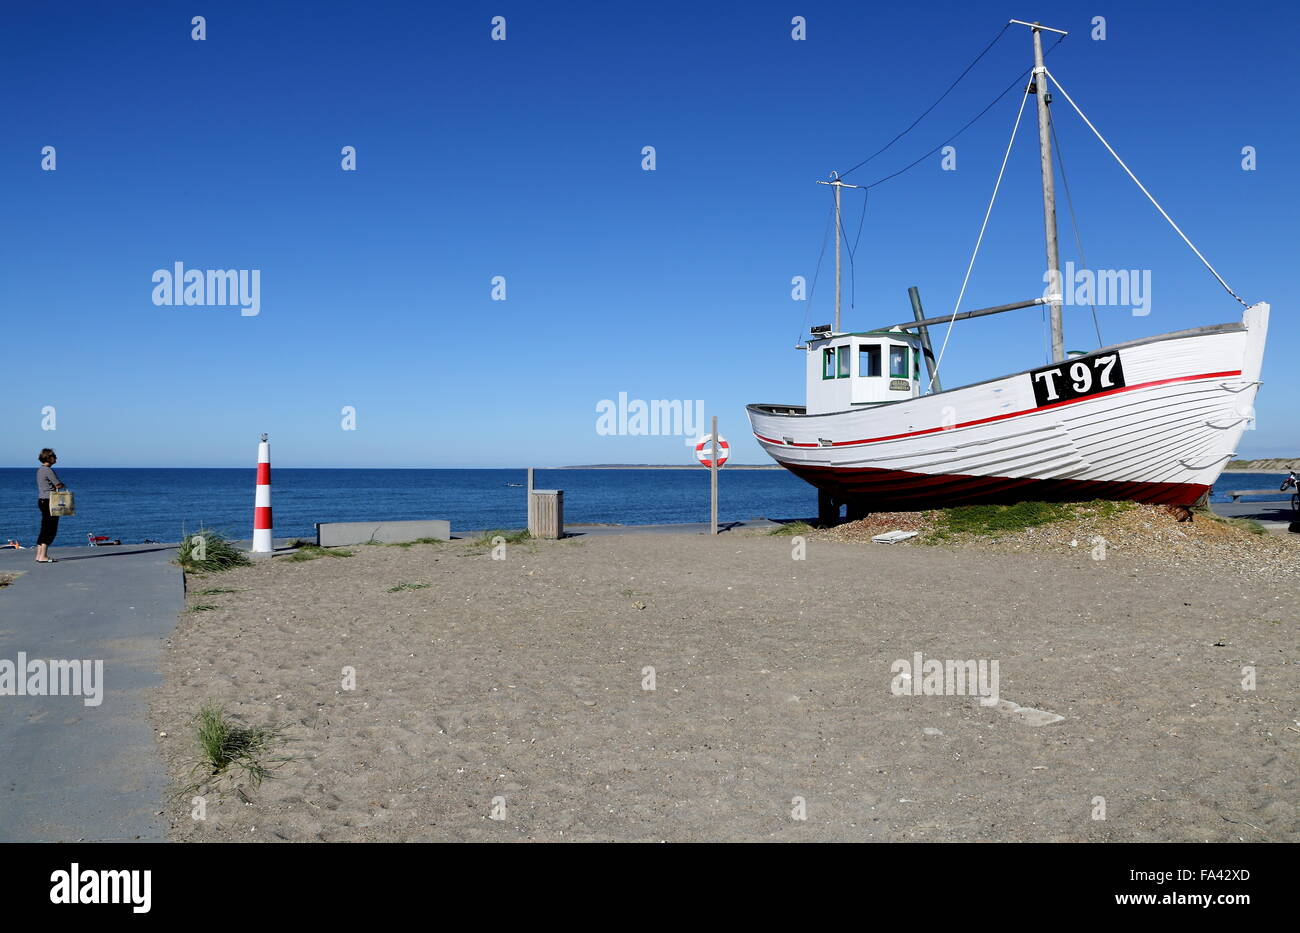 Fishing vessel on the beach after fishing Stock Photo